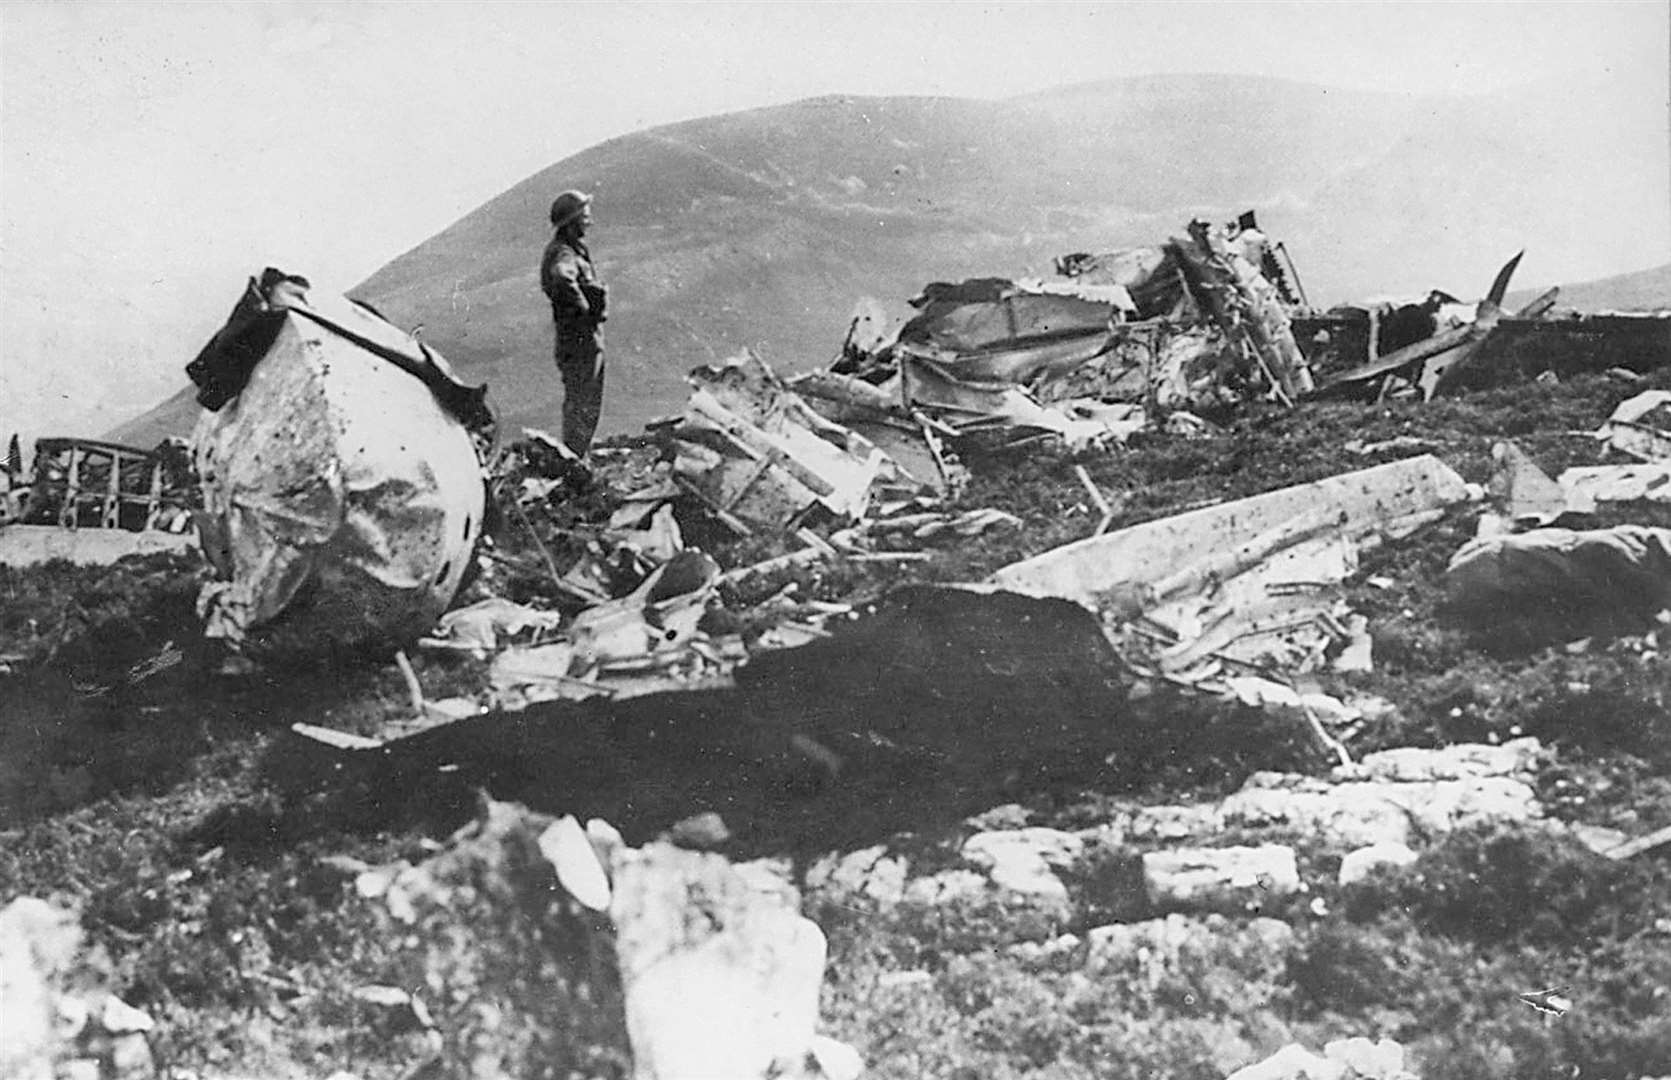 Wreckage of the Sunderland flying boat at the crash scene. Picture: After the Battle